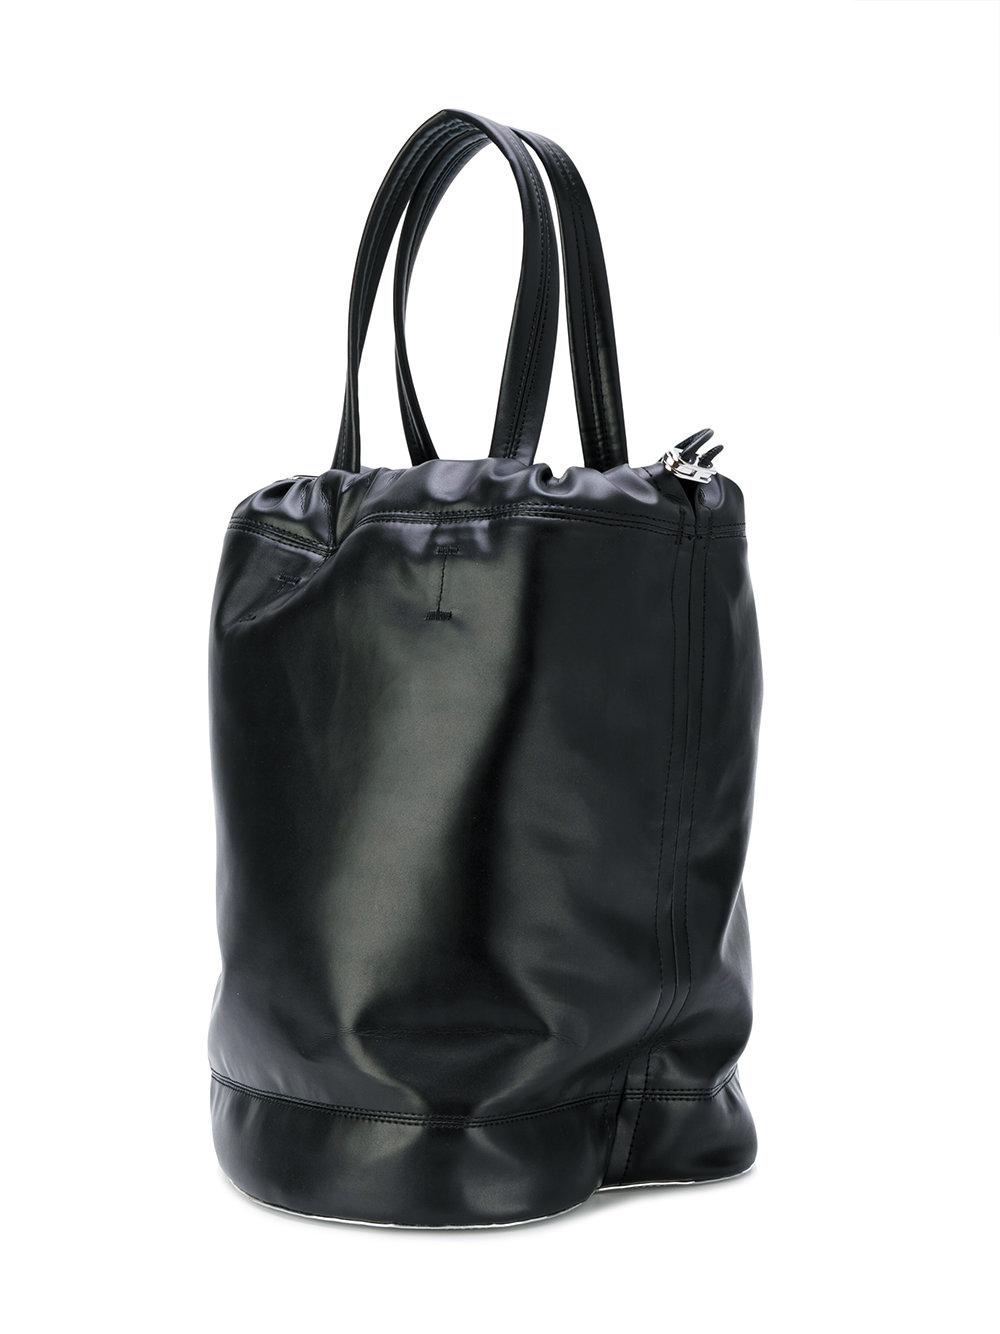 Paco Rabanne Leather Bucket Tote Bag in Black - Lyst